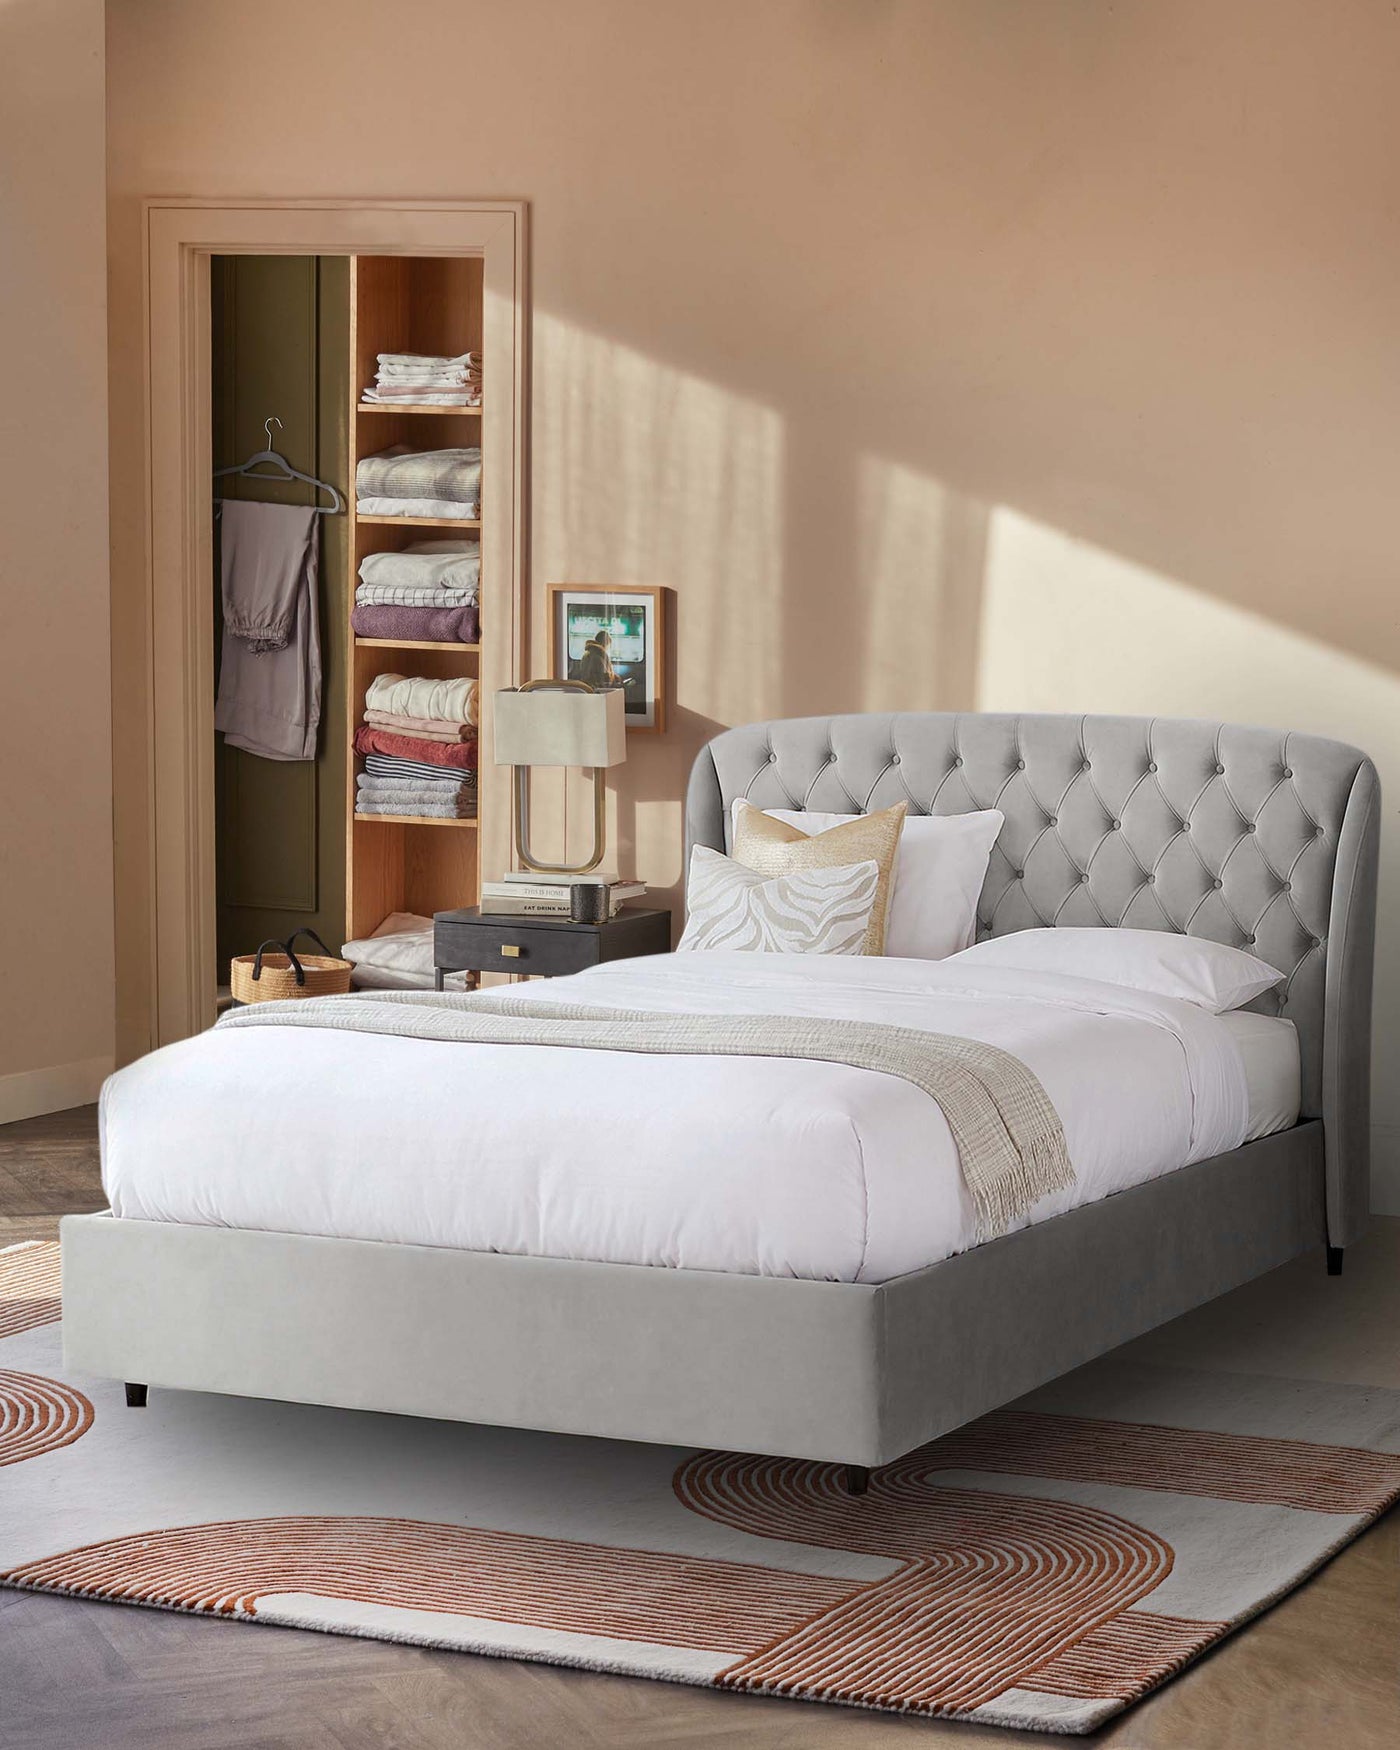 Elegant grey upholstered bed with a tufted headboard design and a neatly draped white bedsheet, complemented by decorative beige and golden throw pillows. There's a matching grey bedside table with a modern lamp and a subtle piece of art, placed on a contemporary rug with geometric patterns in shades of beige, orange, and grey.